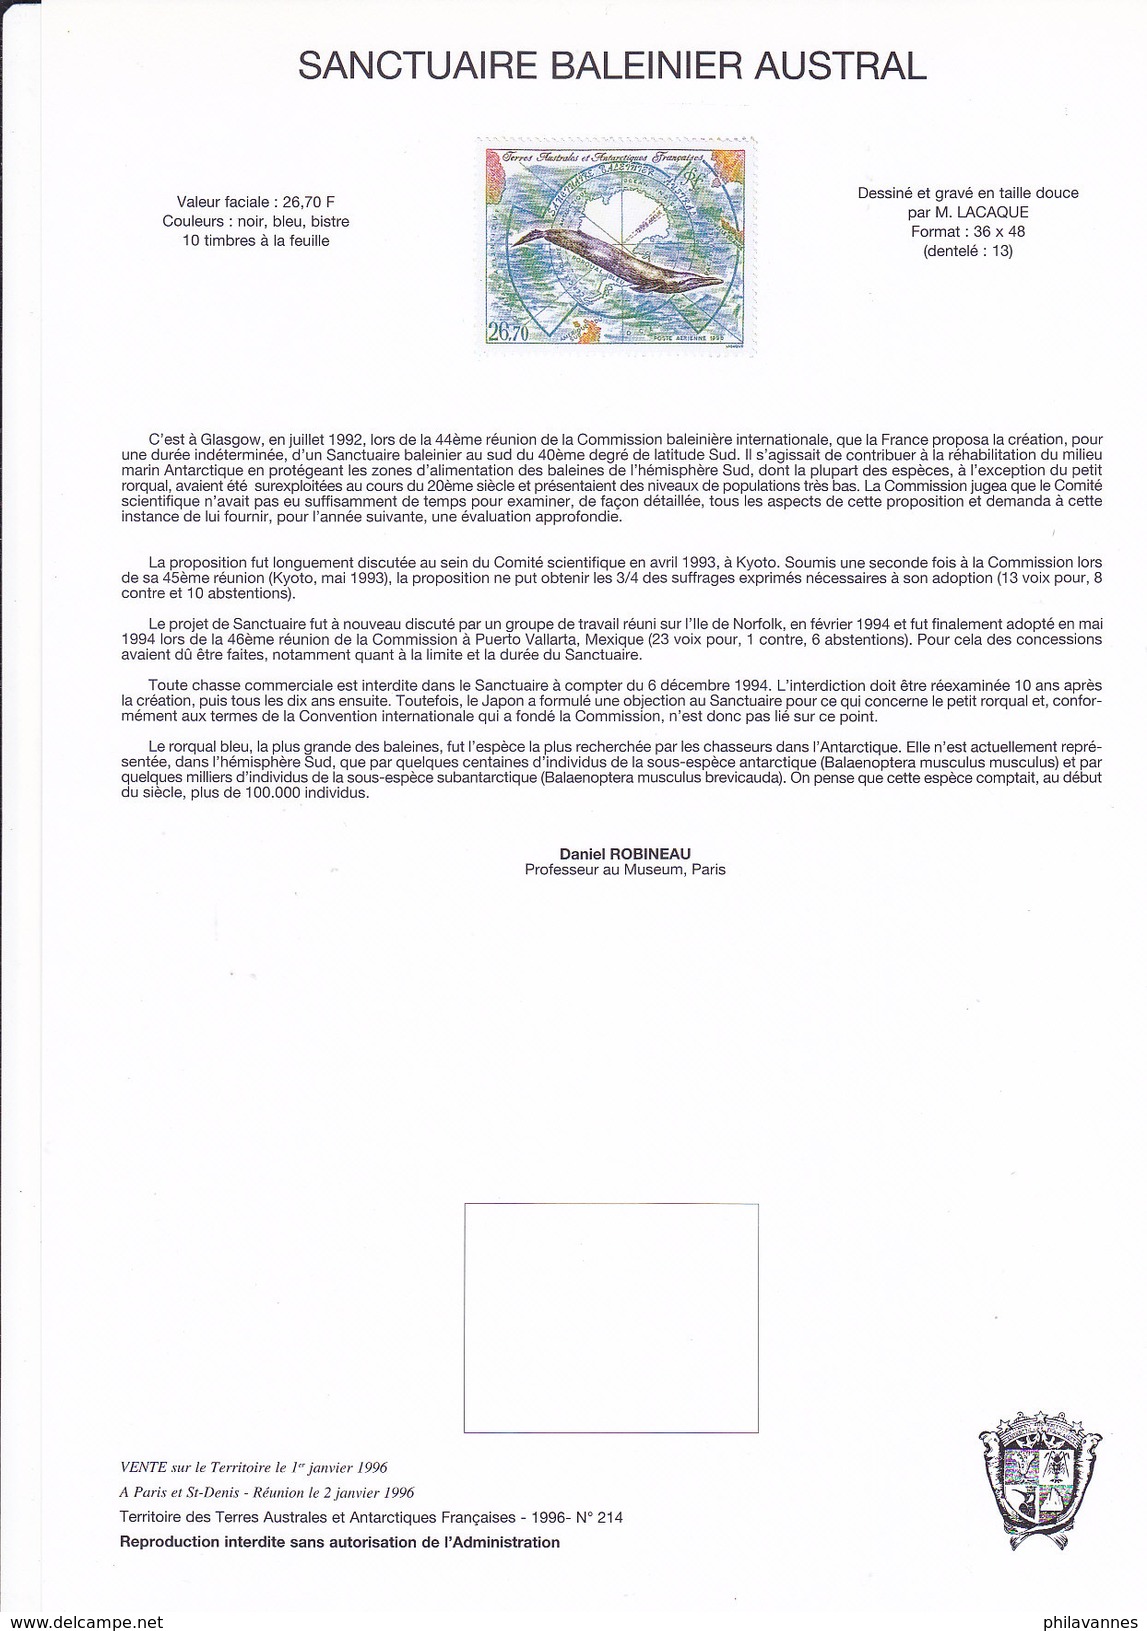 France, TAAF, notices 1996, ( not taaf/8)